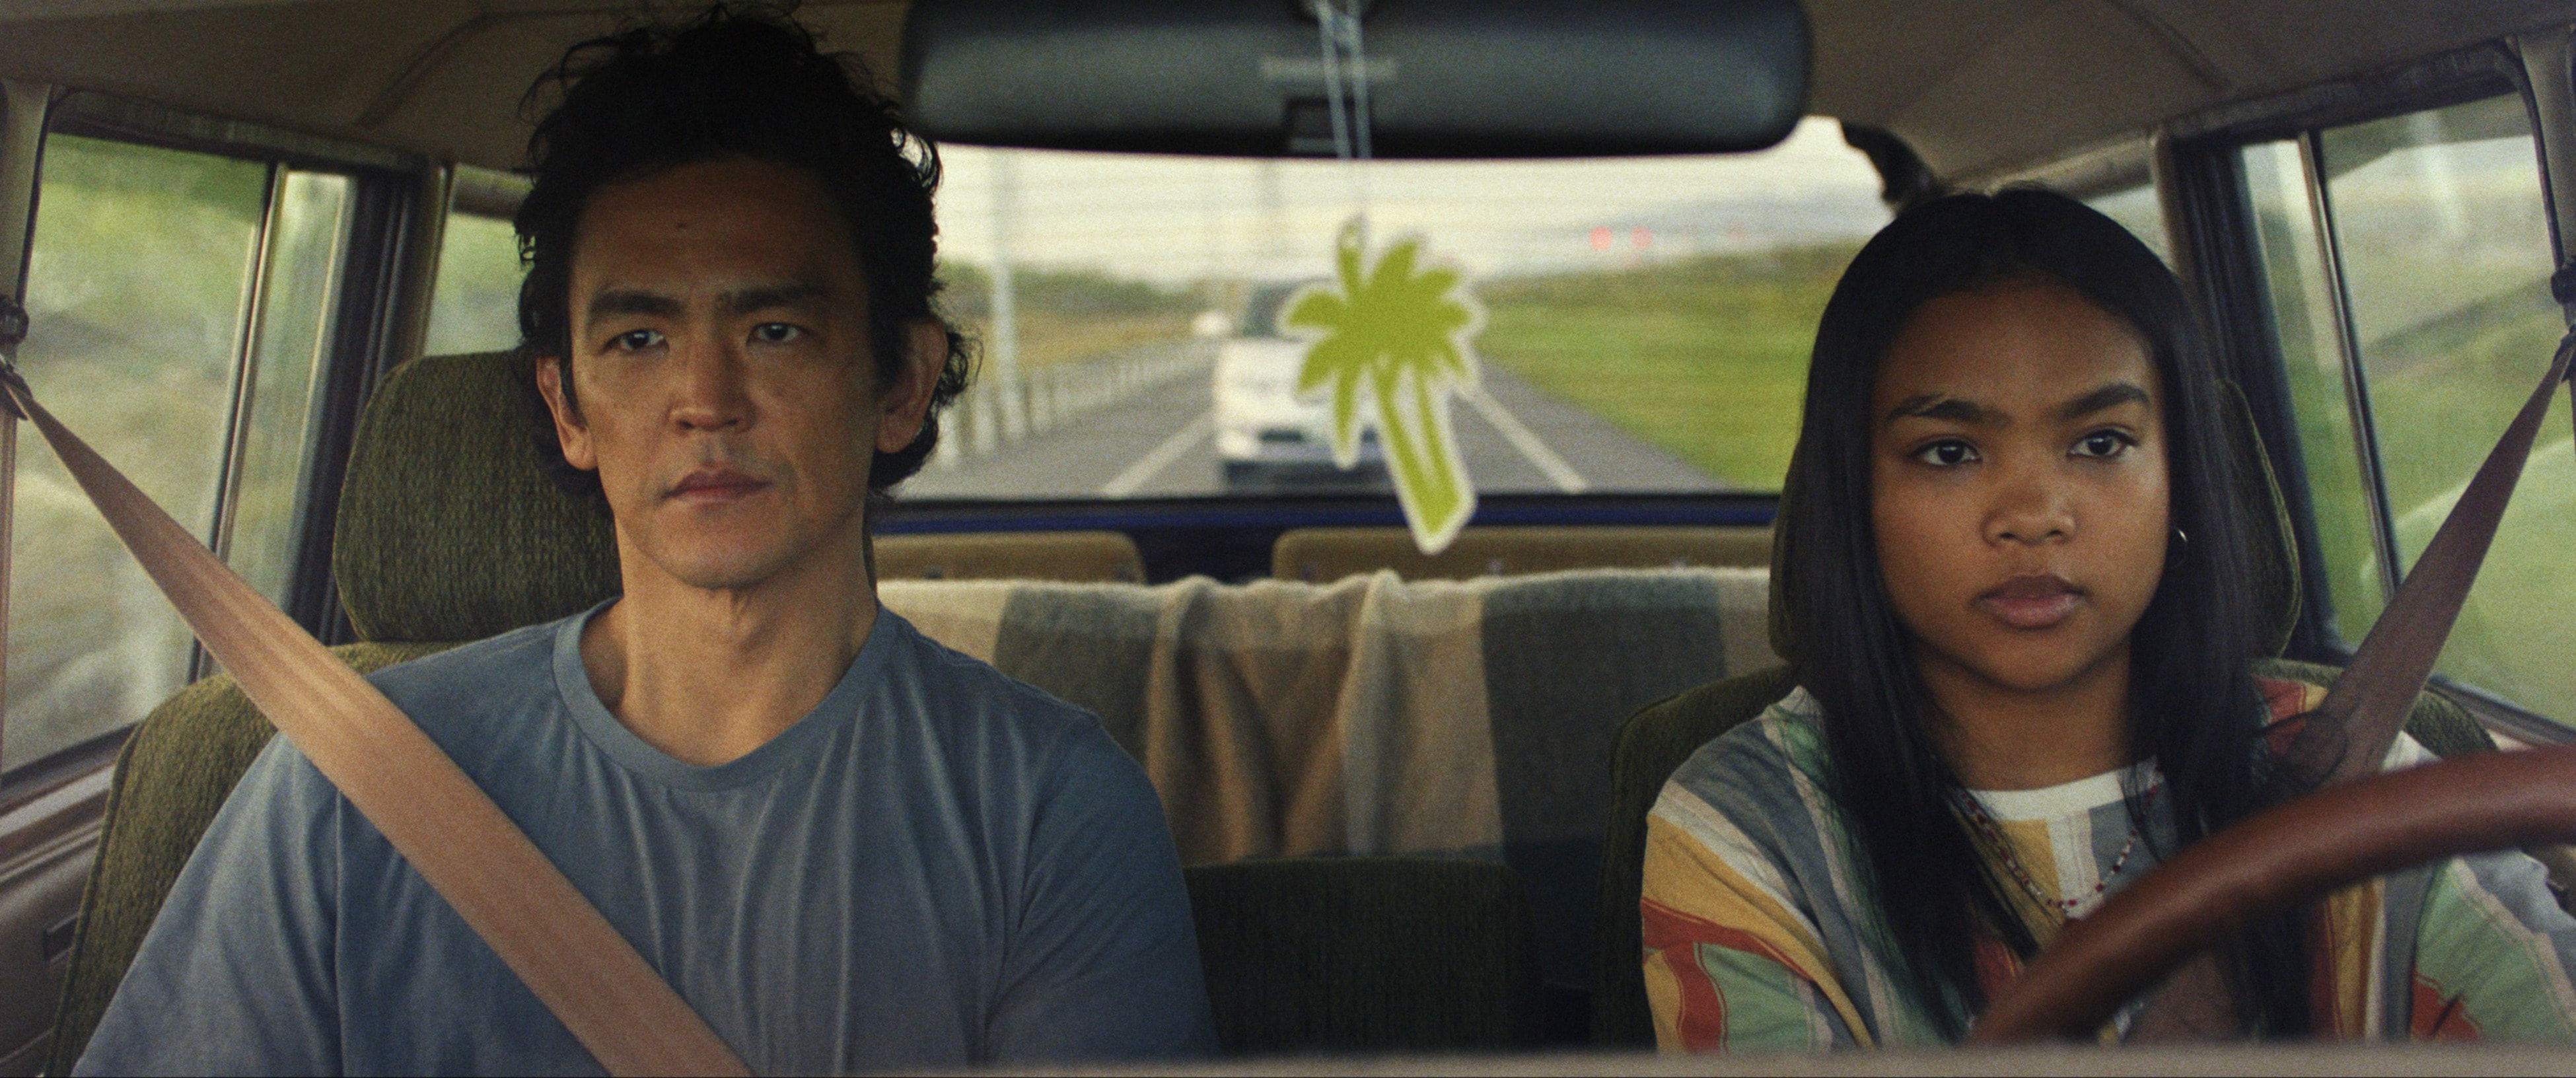 John Cho and Mia Isaac play a father-daughter duo on a road trip in Don't Make Me Go.